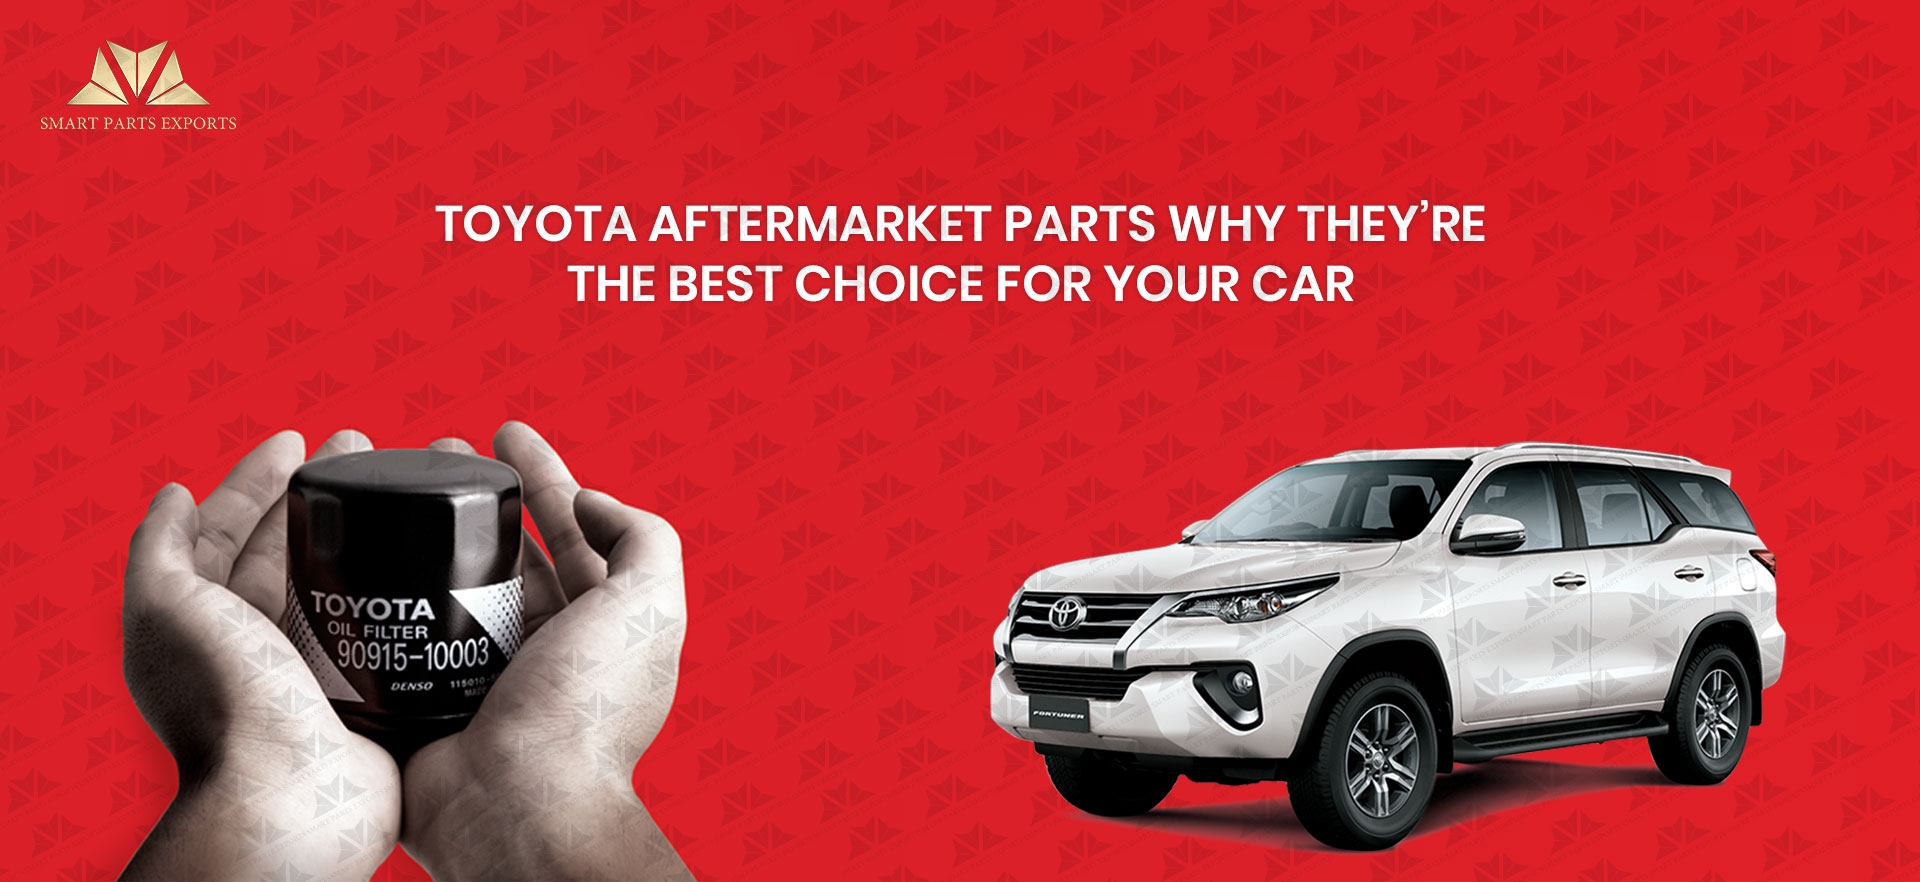 Toyota Aftermarket Parts: Why They're the Best Choice for Your Car